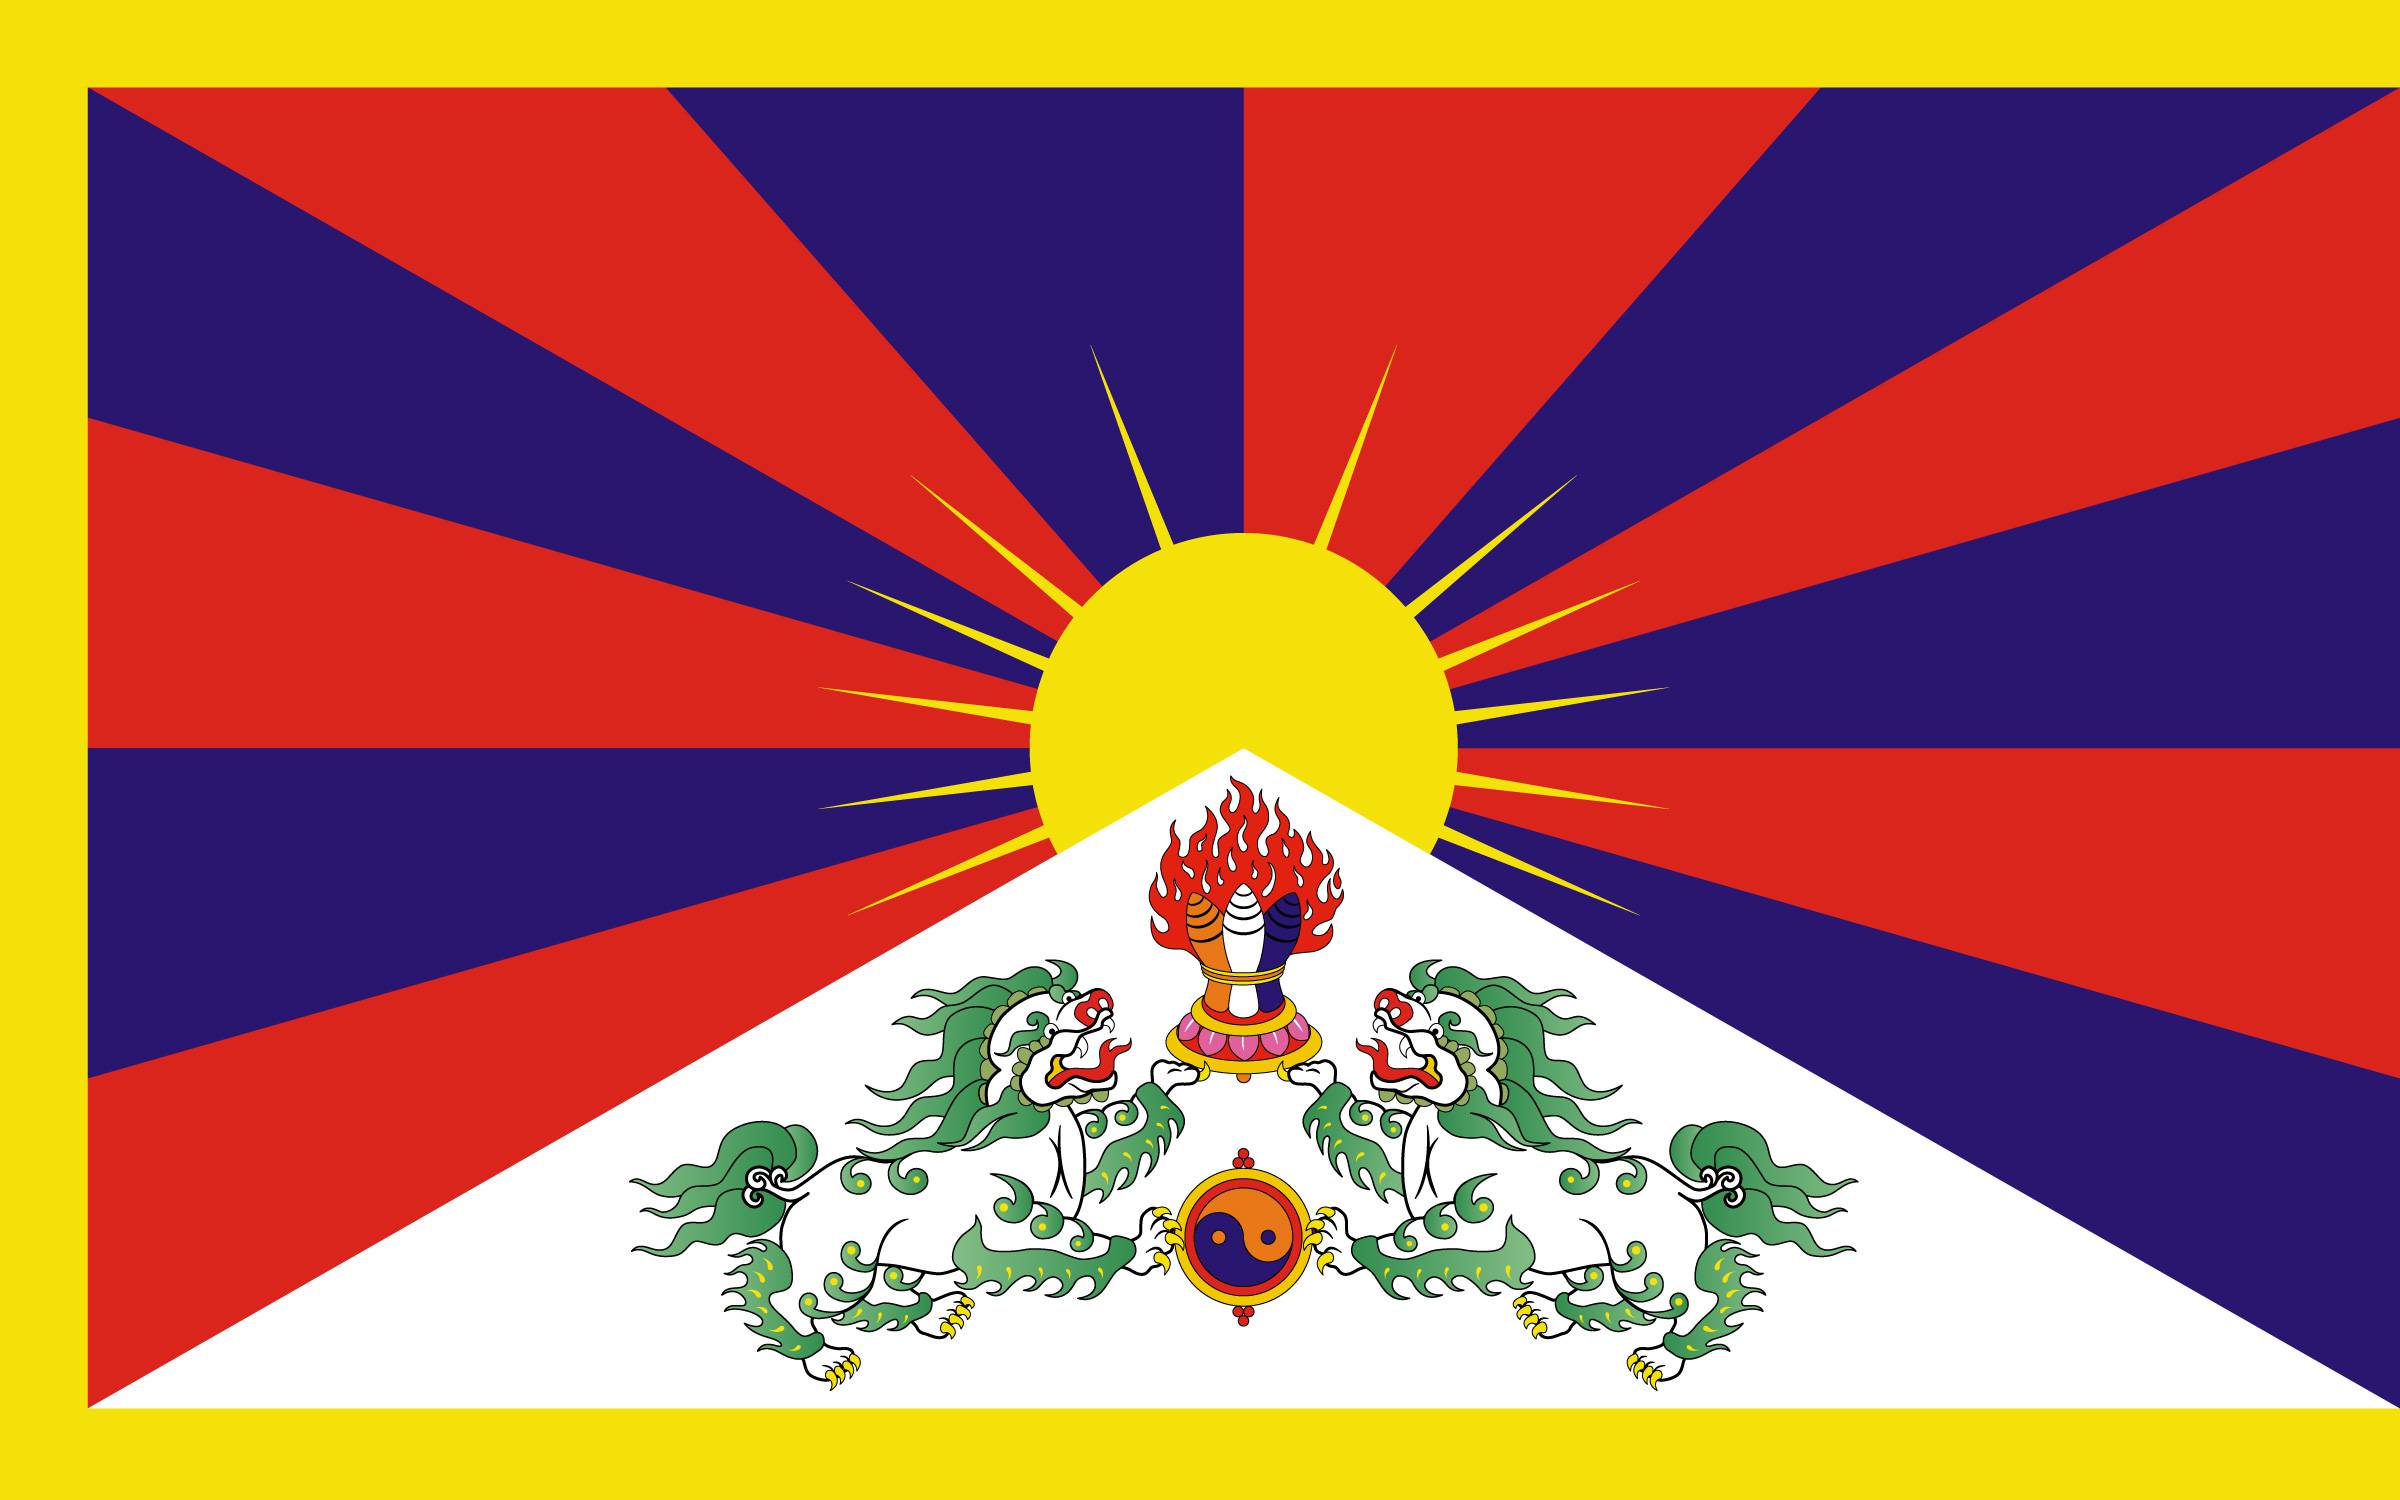 Cres tibet flag wallpaper - - High Quality and Resolution